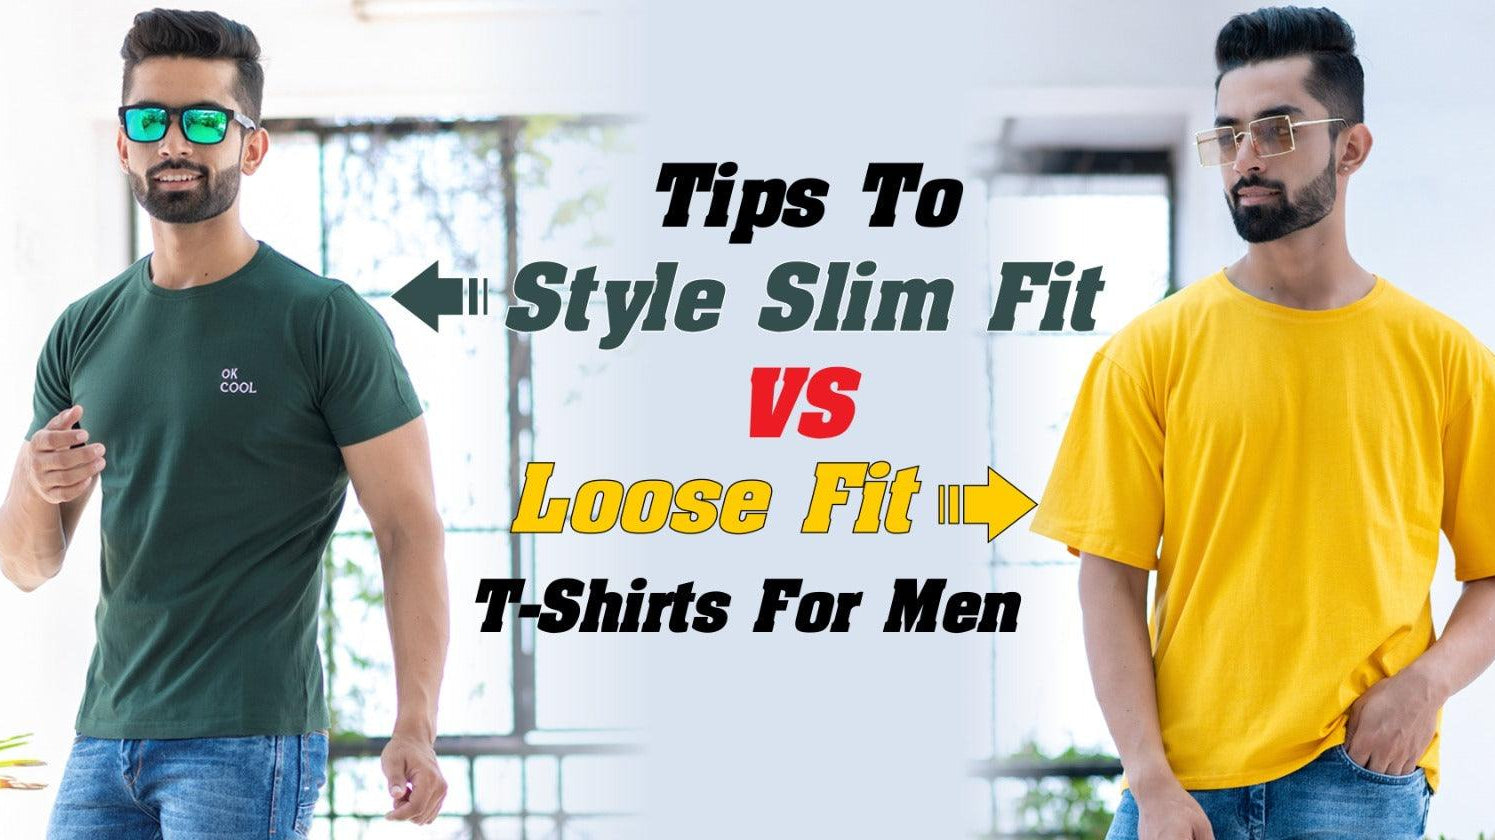 Tip to style slim fit vs loose fit t-shirts for men